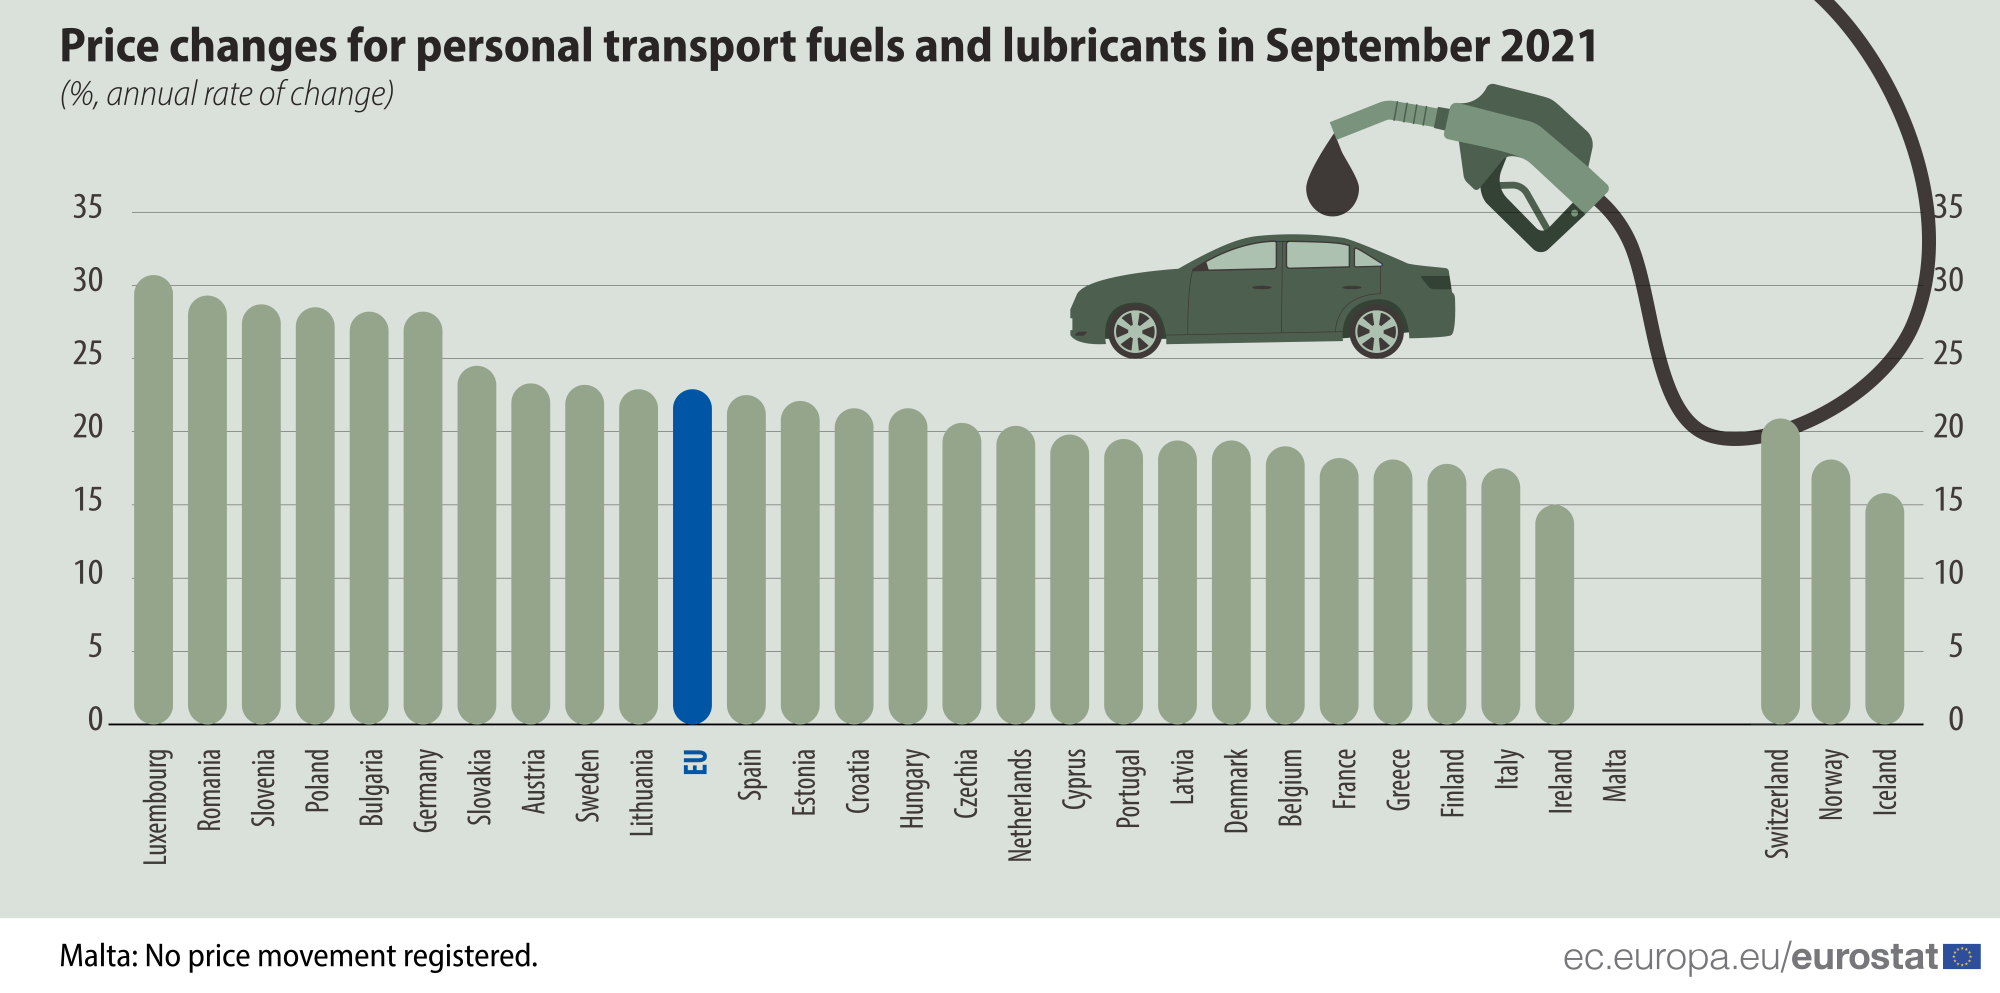 Bar graph: Price changes for personal transport fuels and lubricants in September 2021, %, annual rate of change, in the EU Member States and EFTA countries